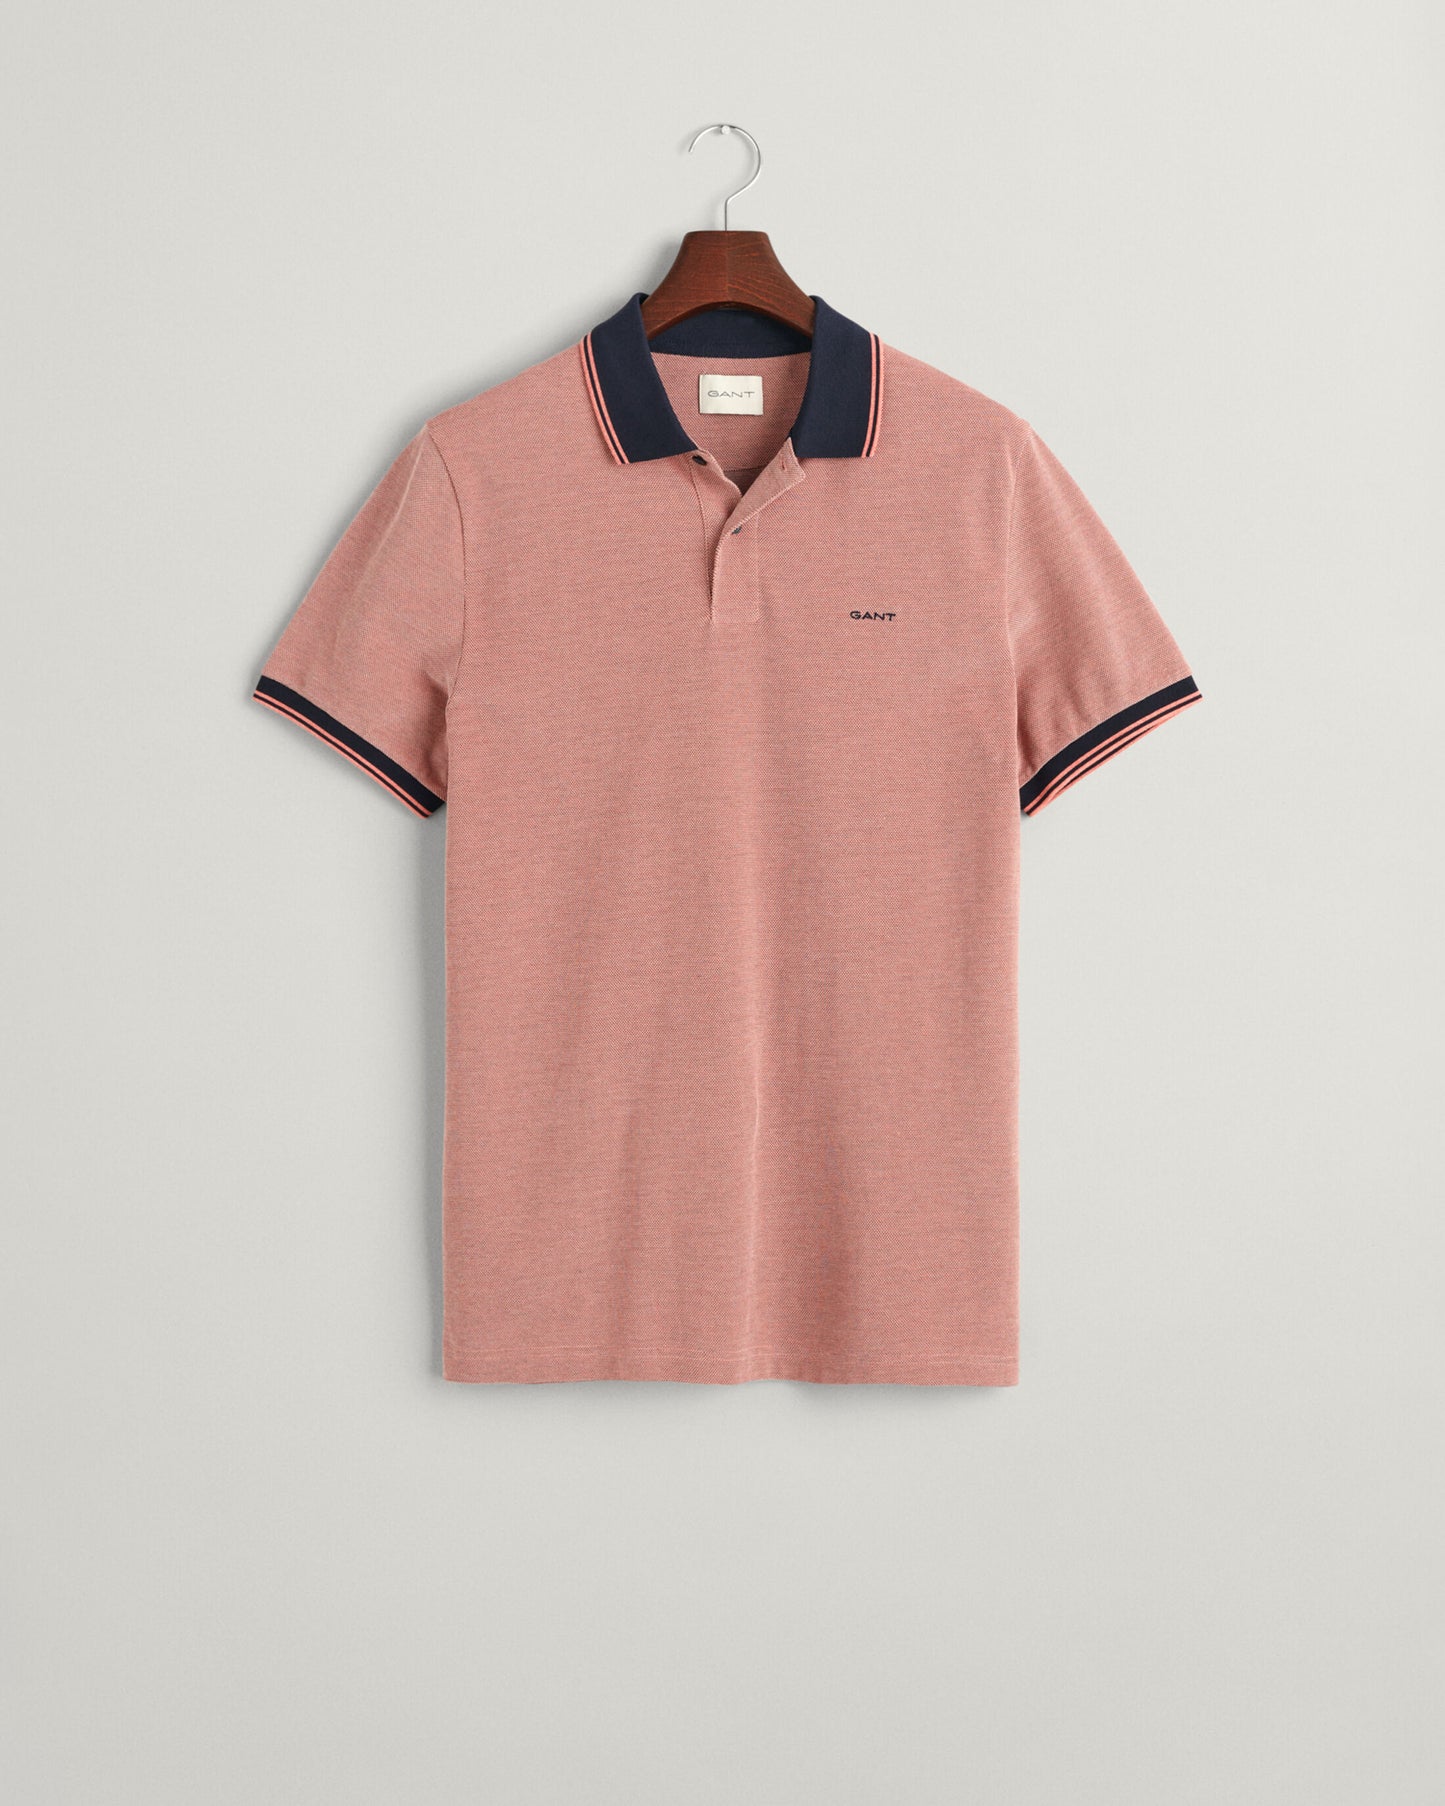 GANT 4-COL OXFORD SUNSET PINK PIQUE POLO